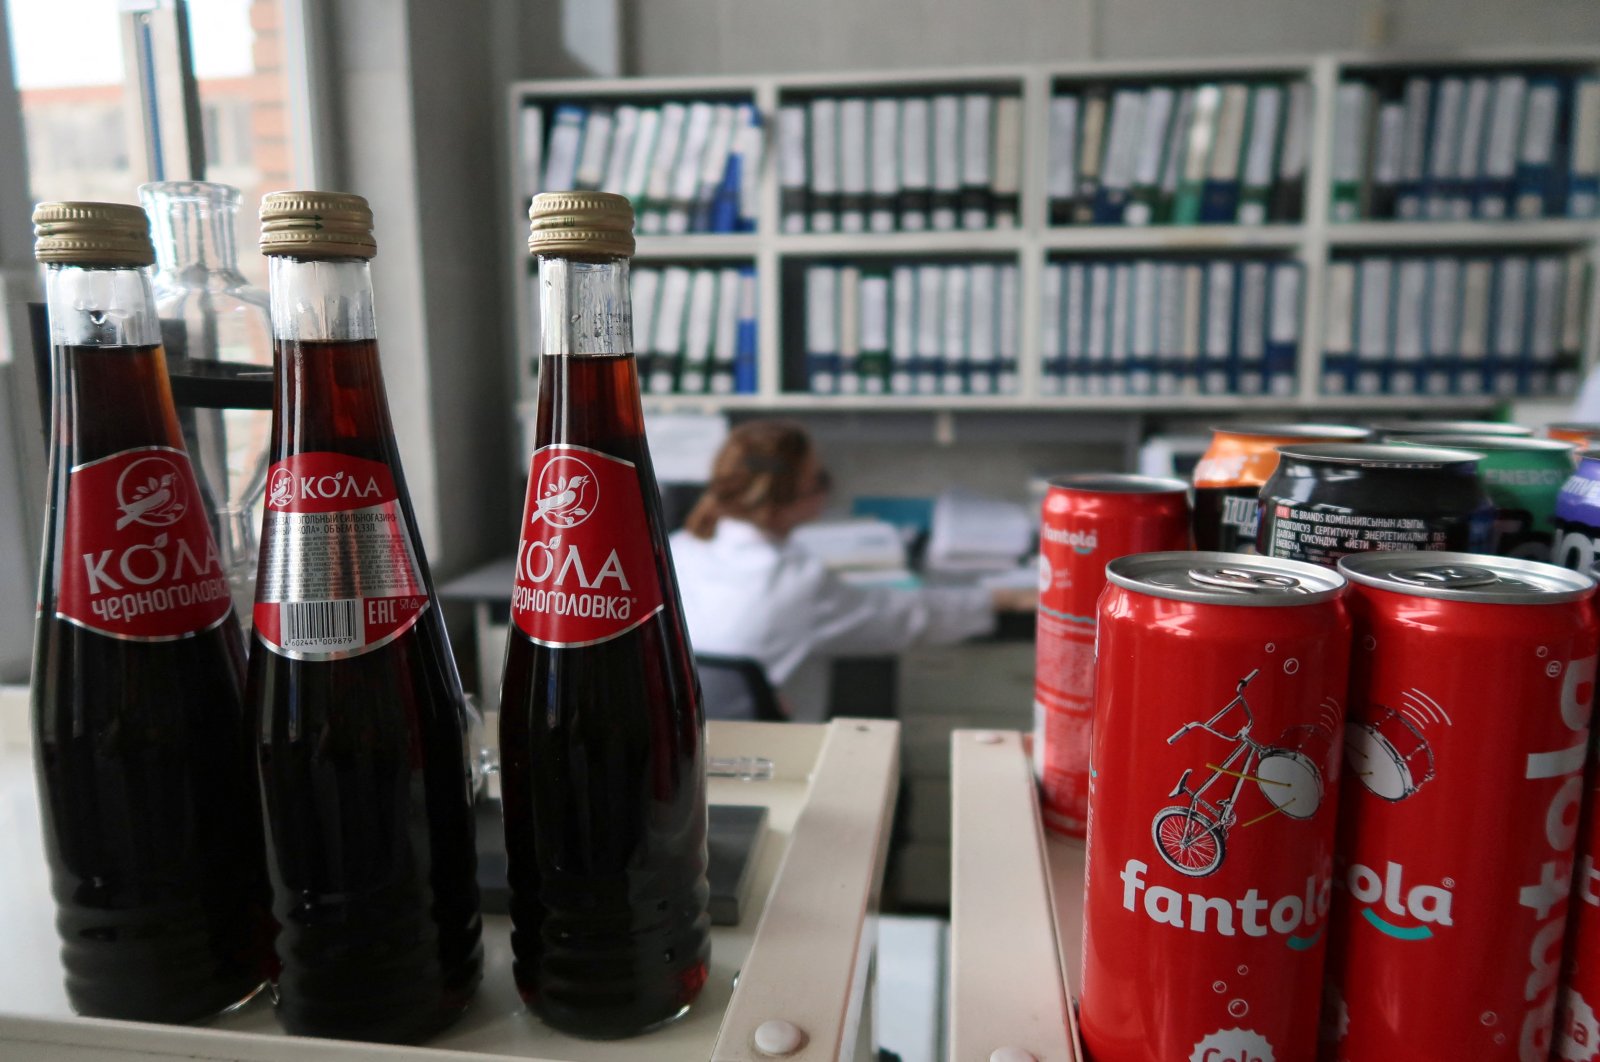 A view shows bottles and cans of soft drinks at a plant of the Chernogolovka company in the town of Chernogolovka in the Moscow region, Russia, July 28, 2022. (Reuters Photo)